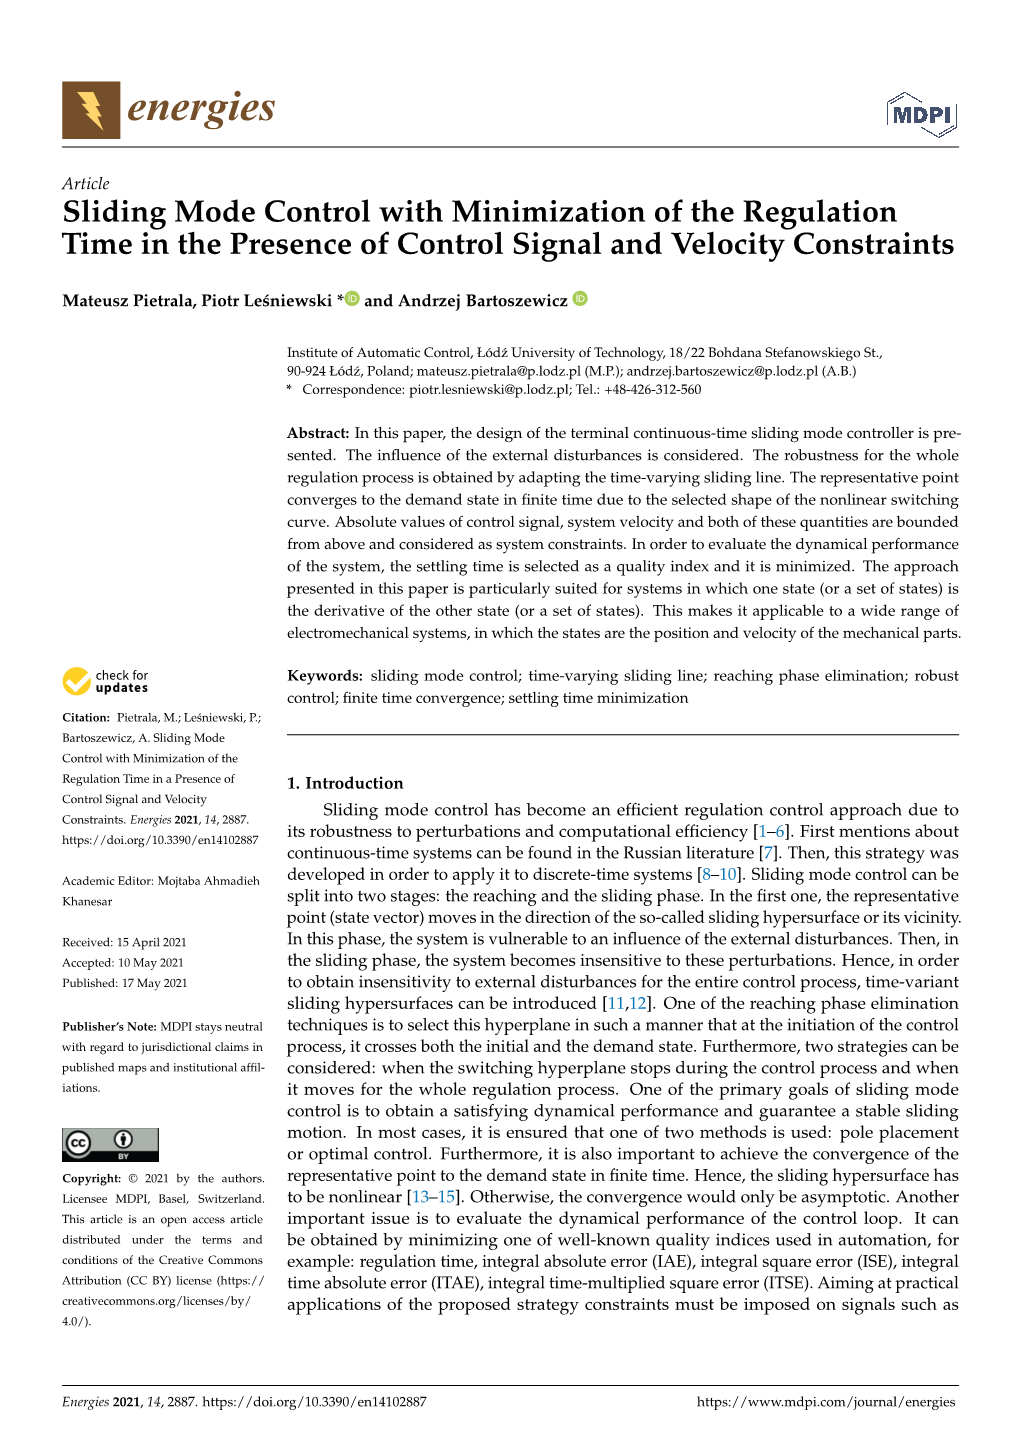 Sliding Mode Control with Minimization of the Regulation Time in the Presence of Control Signal and Velocity Constraints